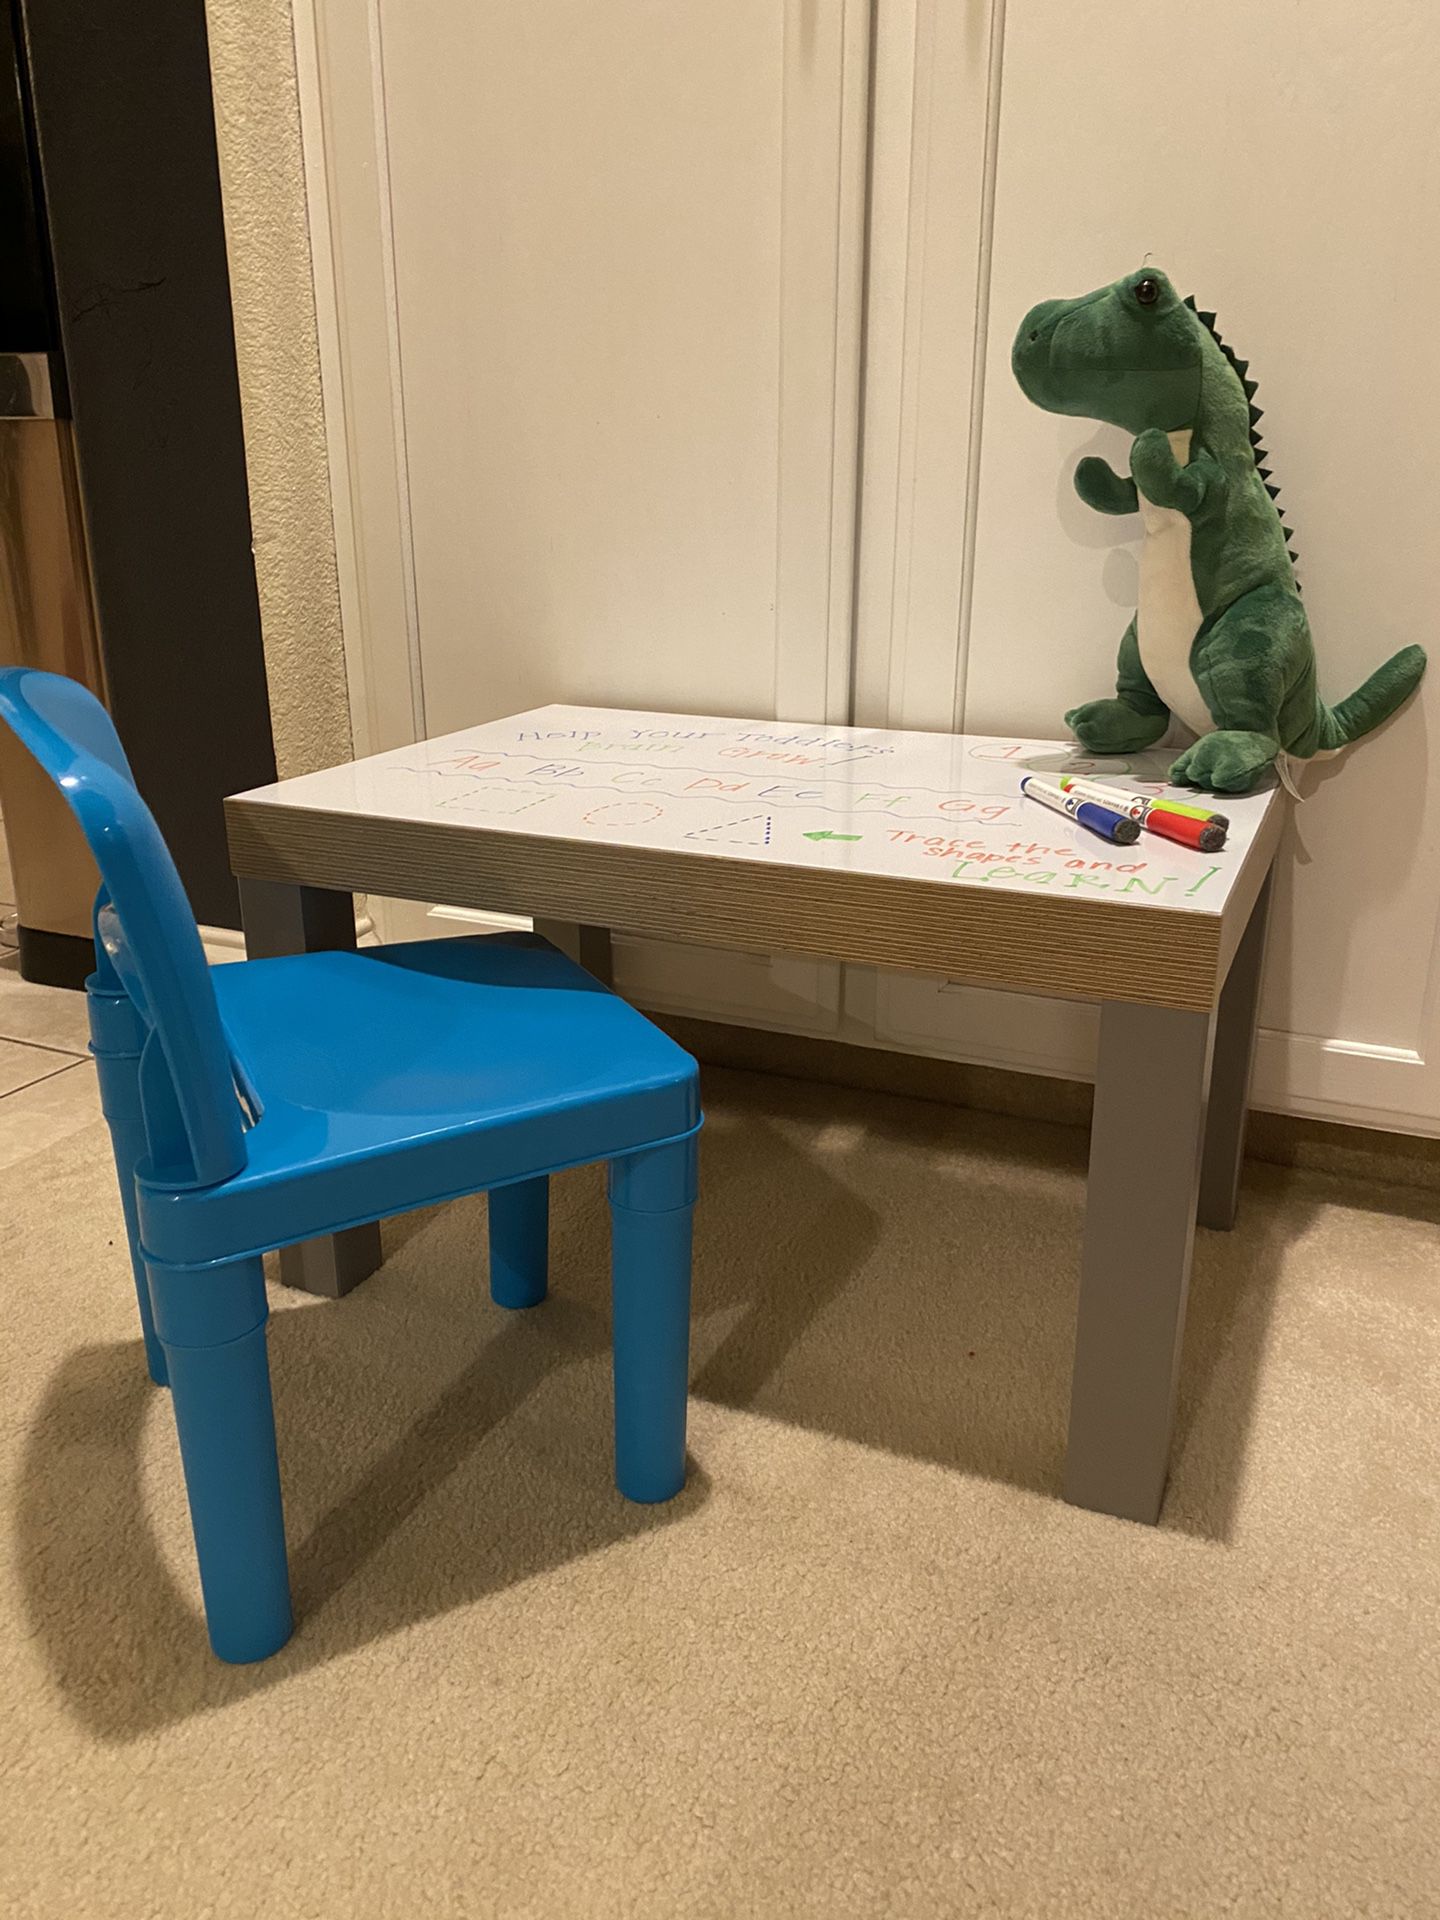 Kids Tots Table! With Chair! Color on Me Table!